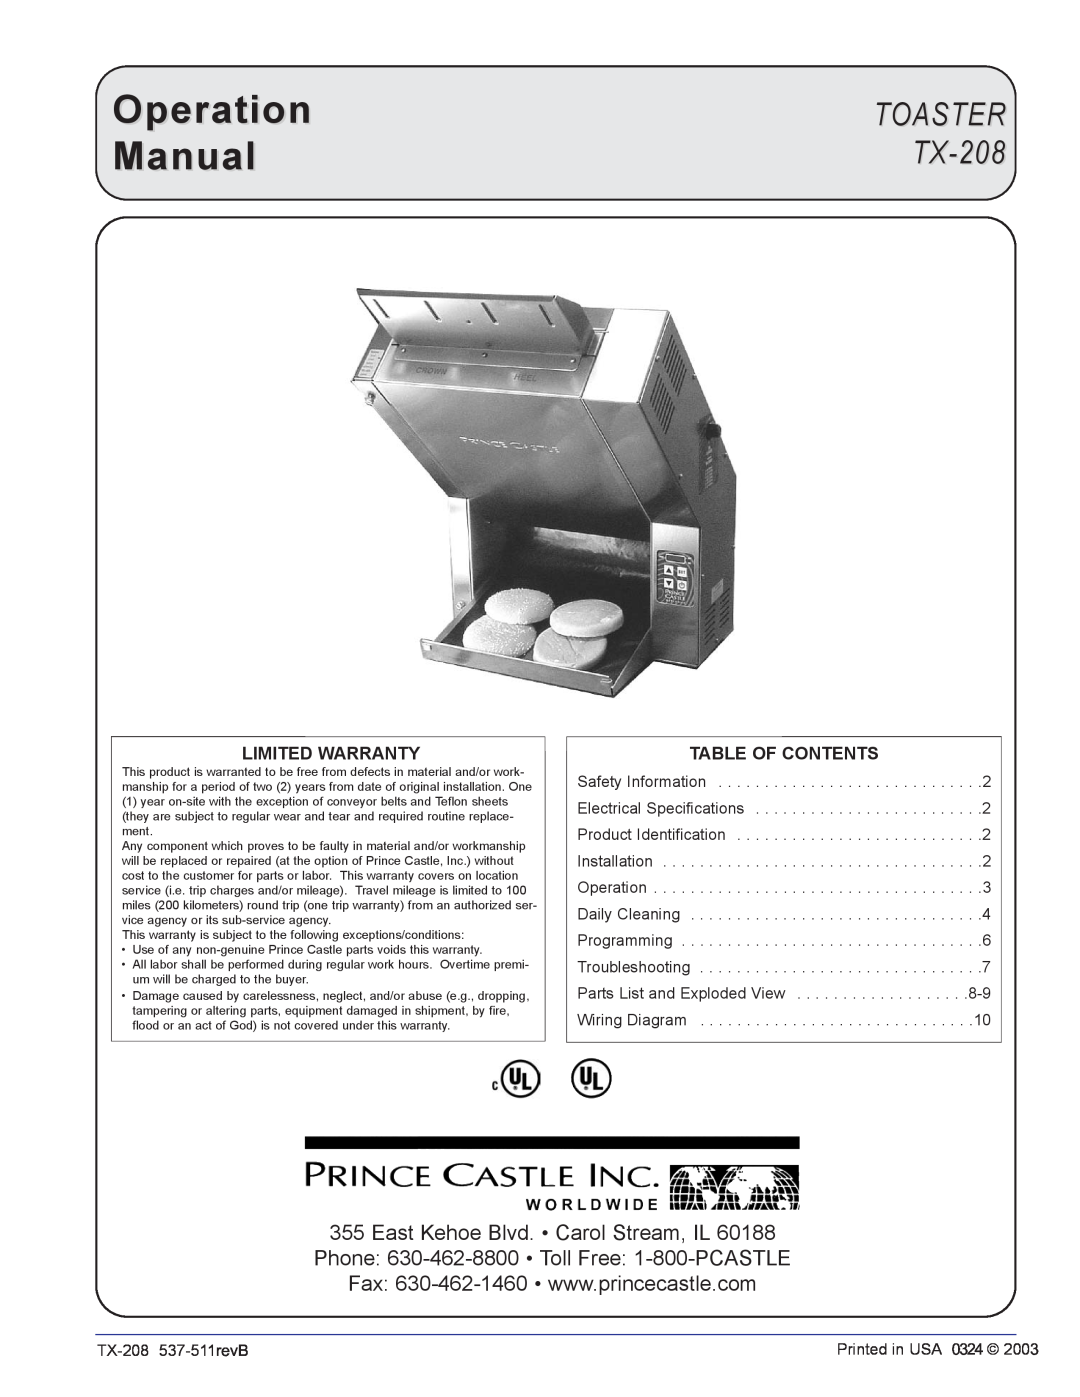 Prince Castle operation manual Limited Warranty, Table Of Contents, Operation Manual, TOASTER TX-208 